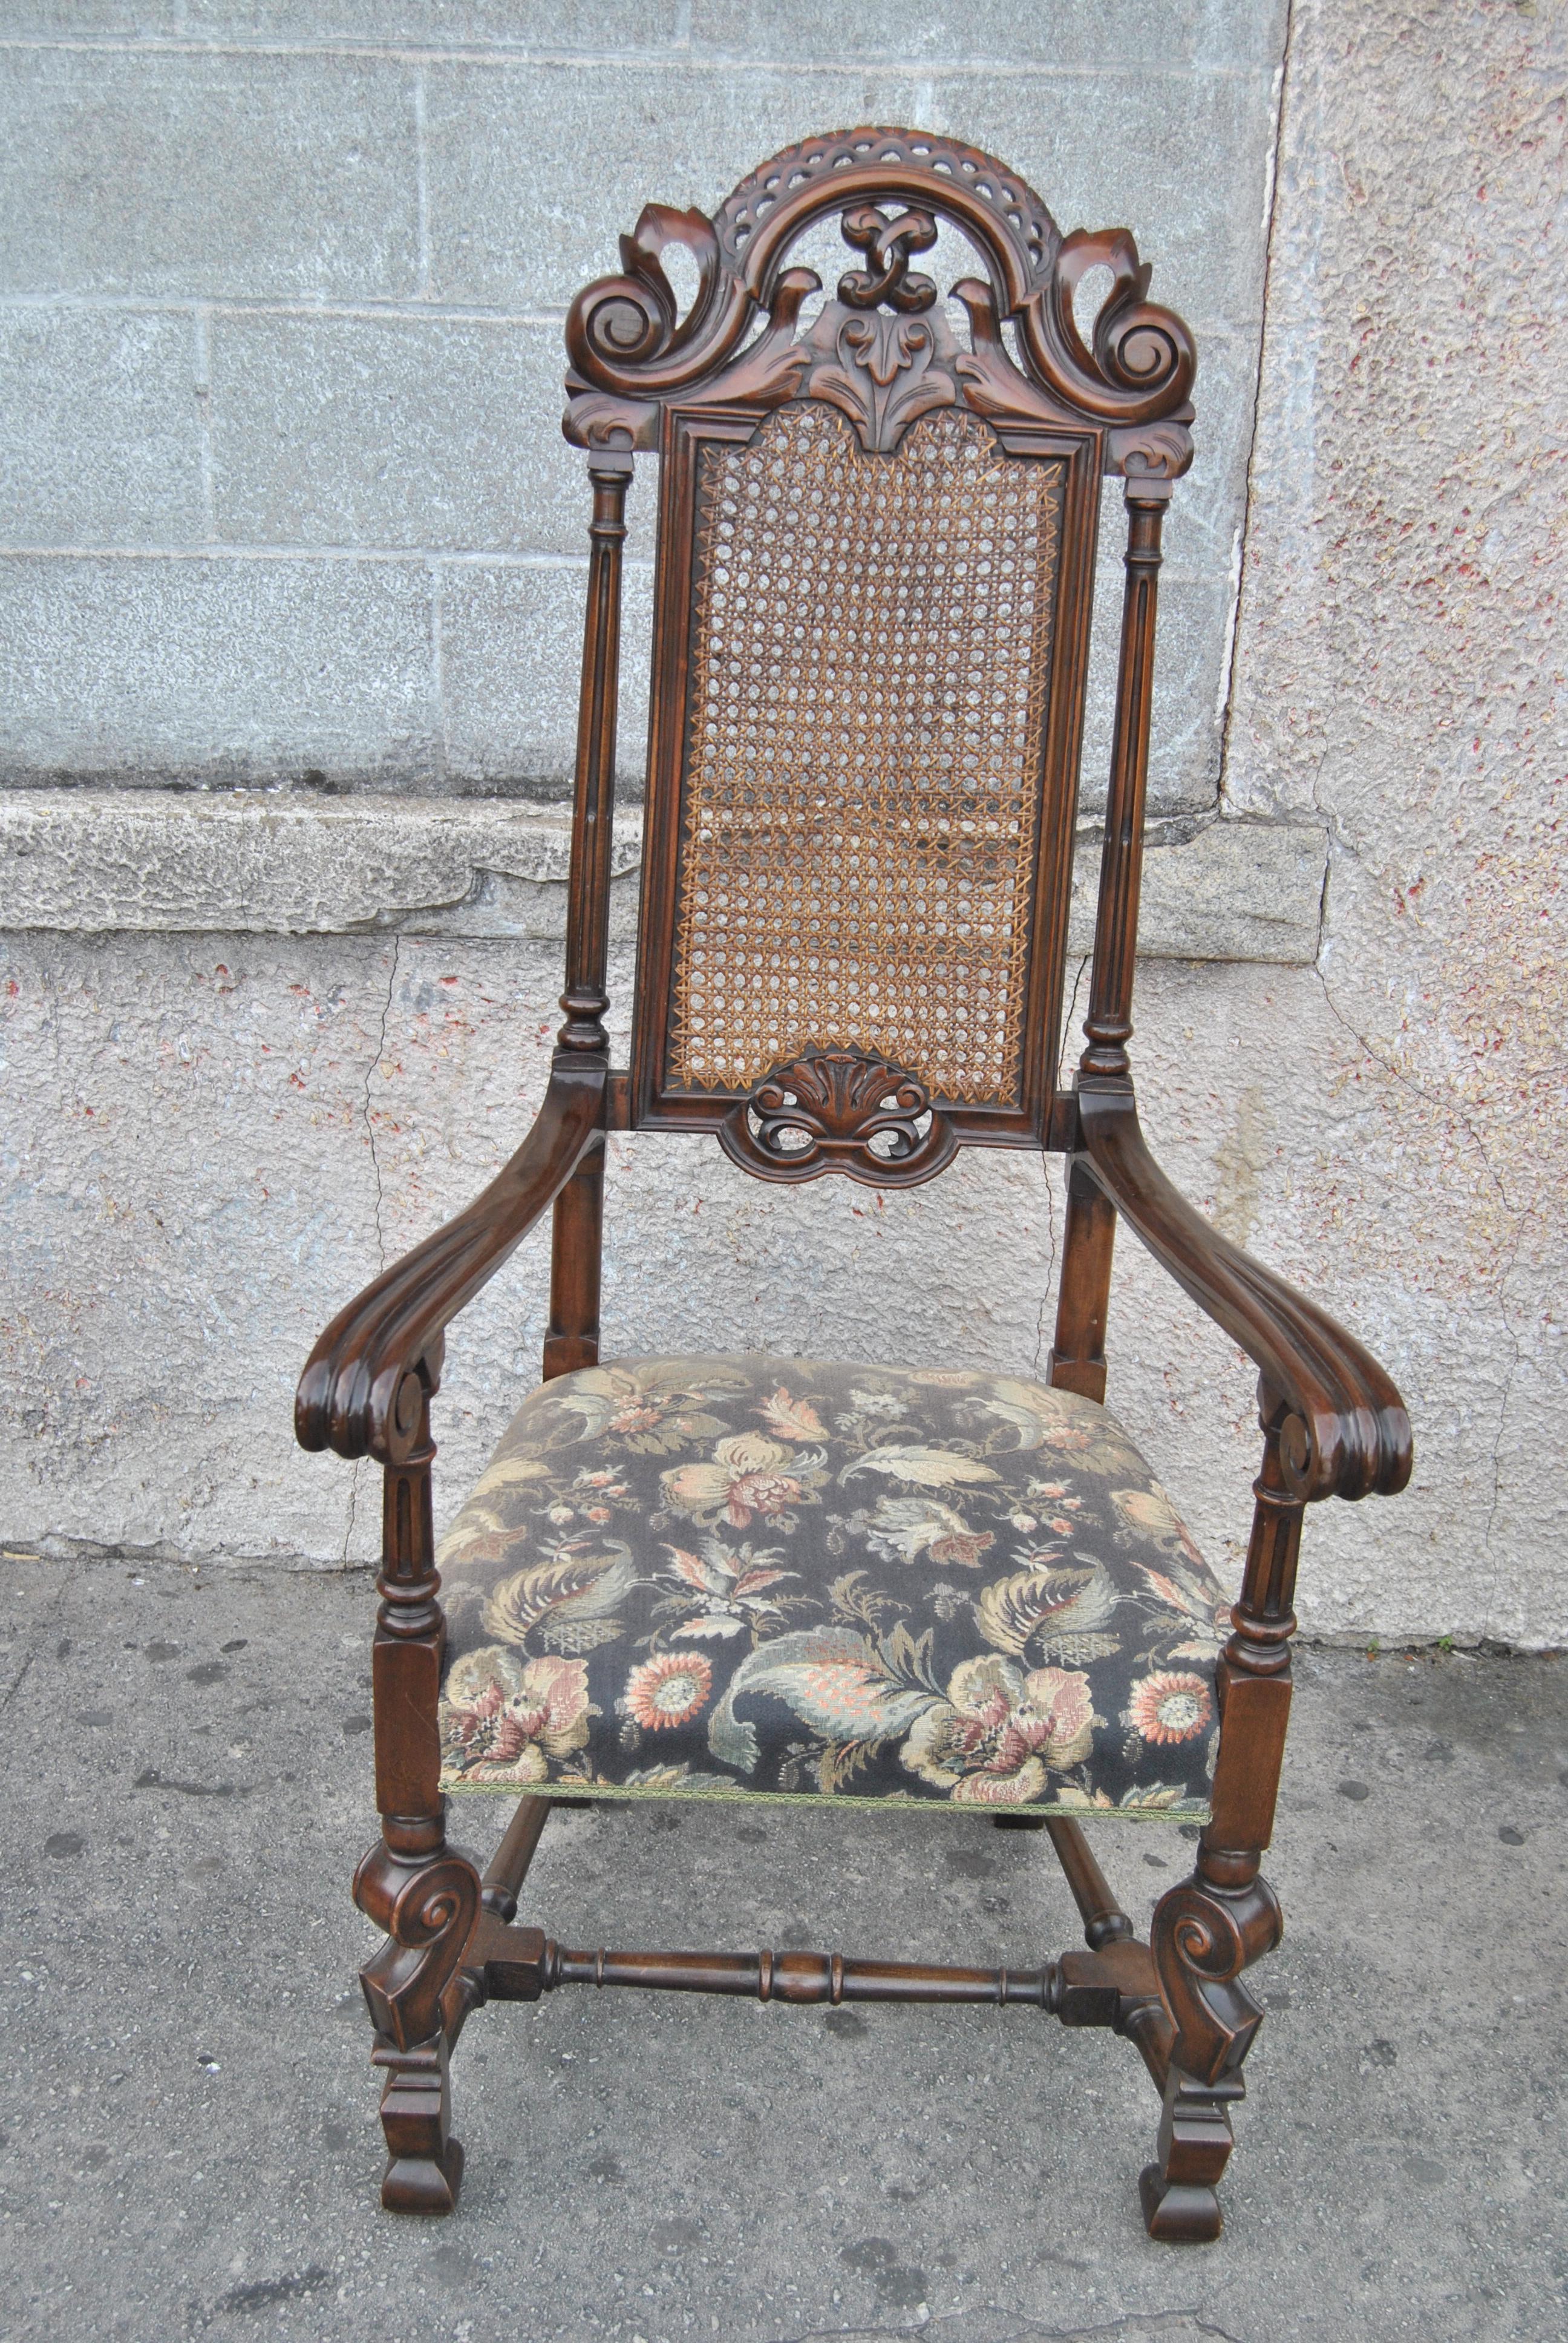 This is a matched set of eight walnut chairs consisting of 2 arms and 6 sides. The chairs were made in England, circa 1880. They are in the William and Mary style. They have a beautifully shaped crest to the top of each chair that has fantastic